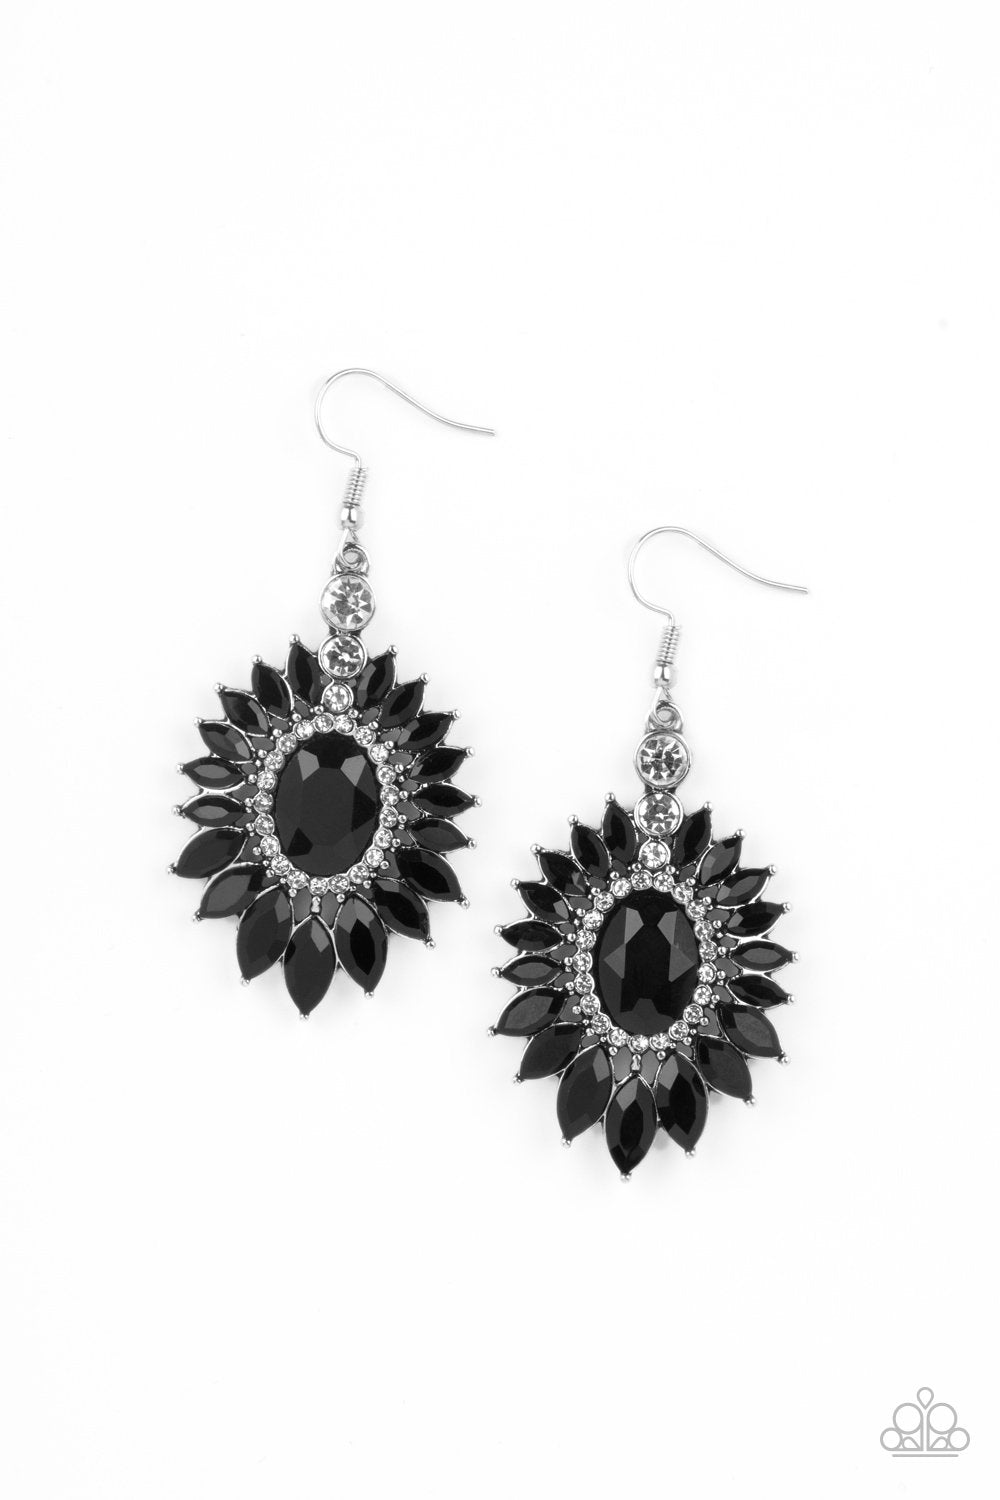 Big Time Twinkle Black and White Rhinestone Earrings - Paparazzi Accessories Spring Exclusive- lightbox - CarasShop.com - $5 Jewelry by Cara Jewels